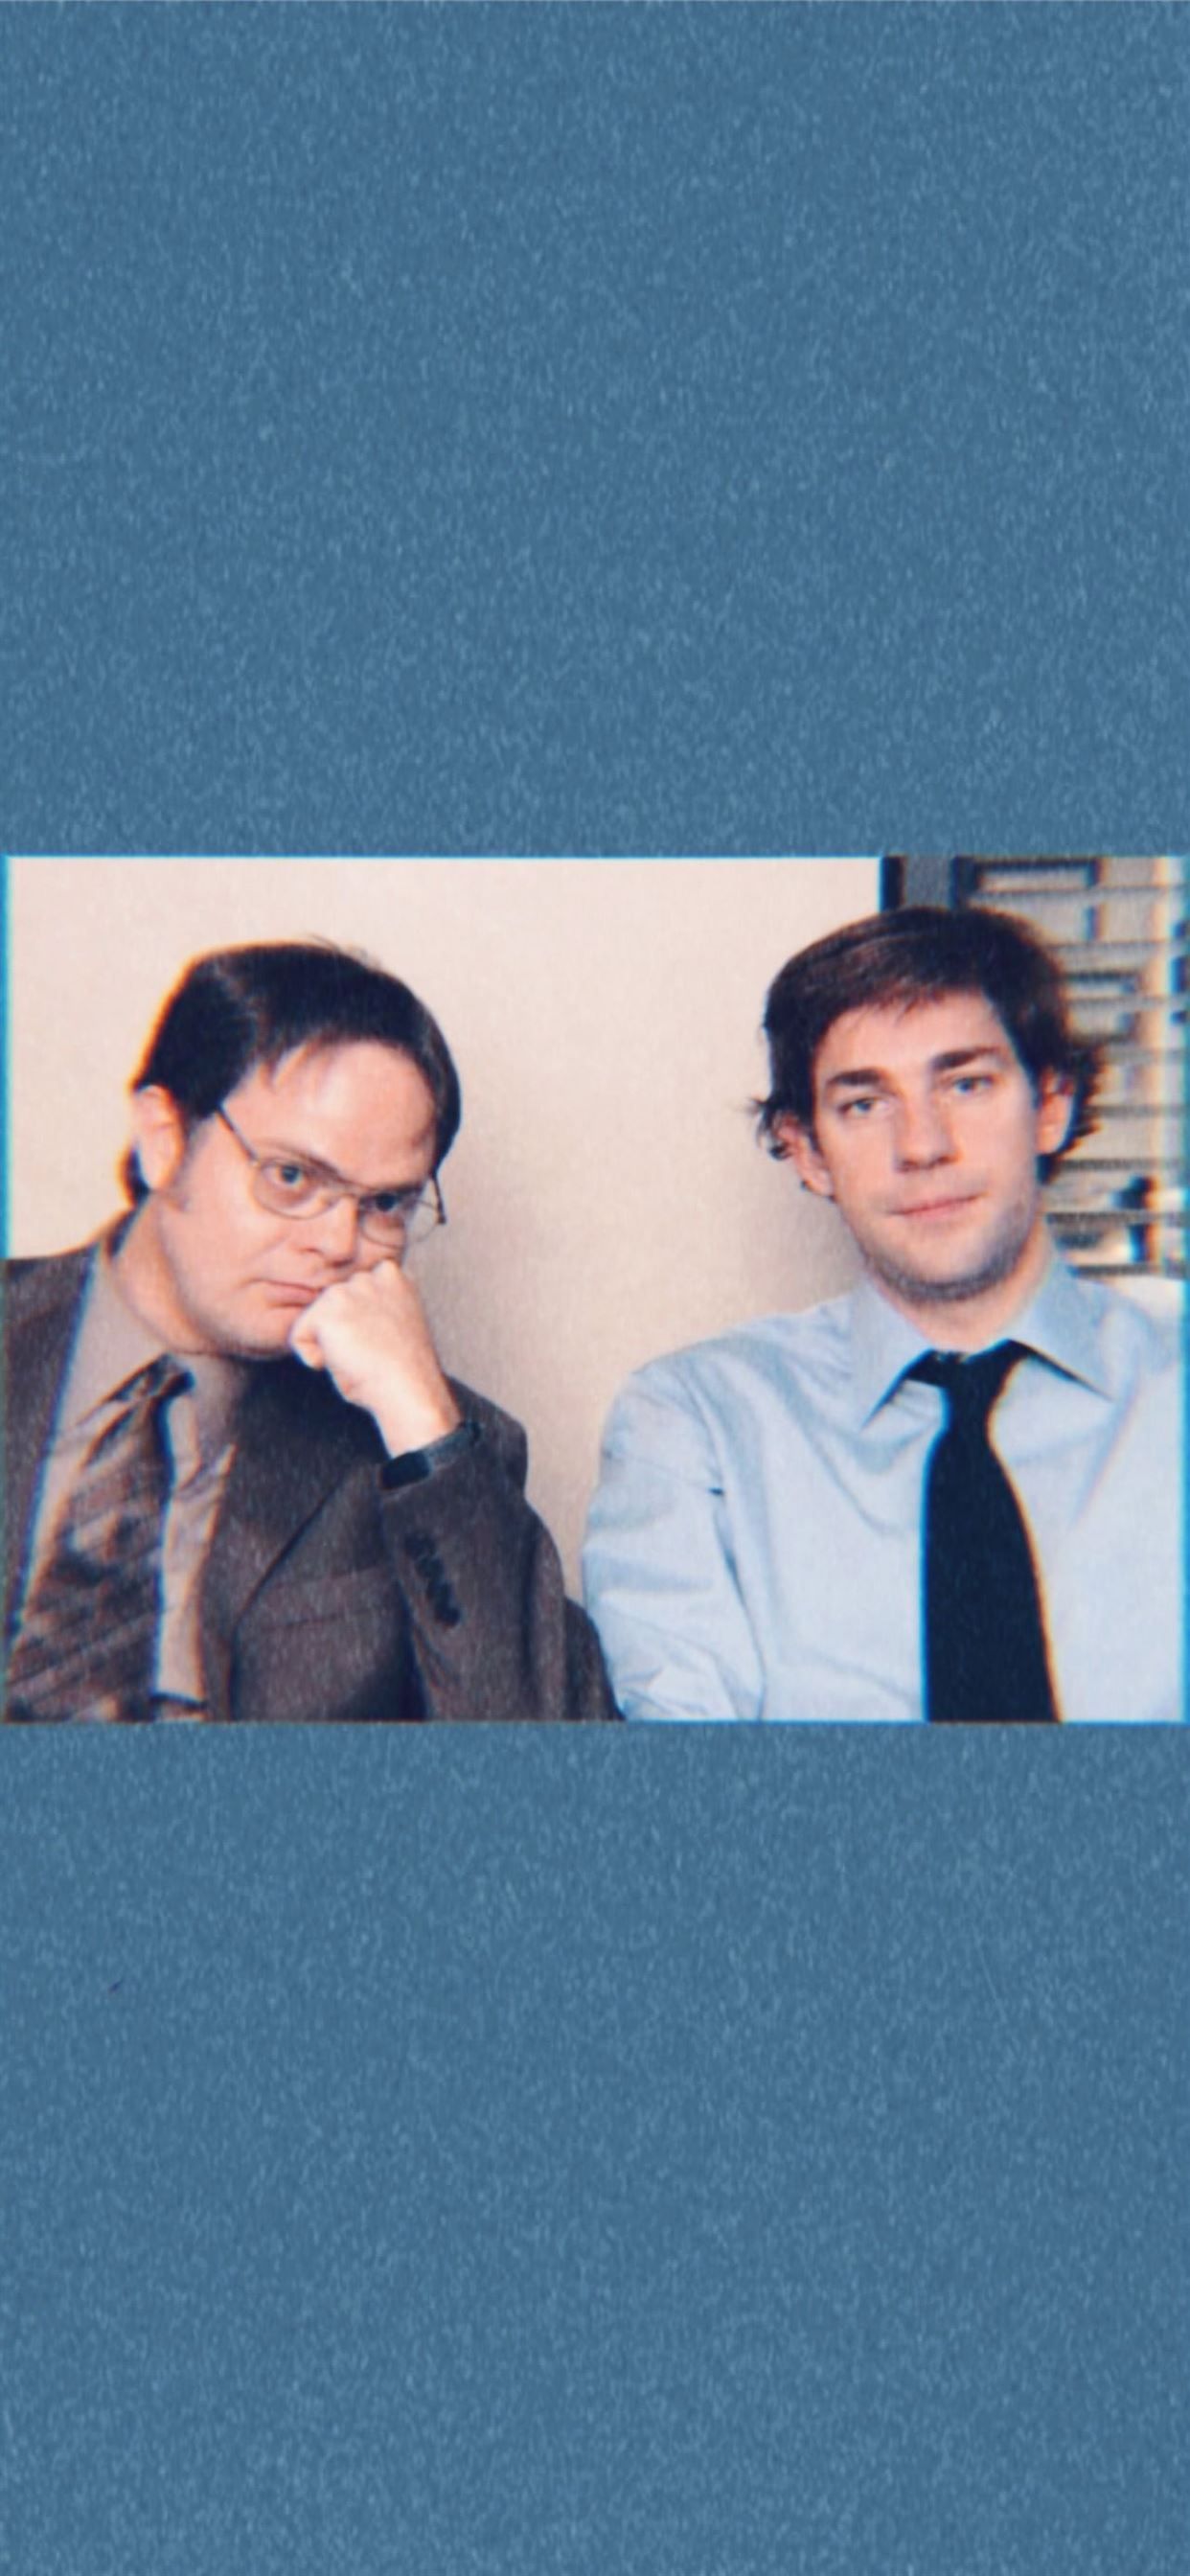 Dwight Schrute The Office Cave iPhone Wallpaper Free Download